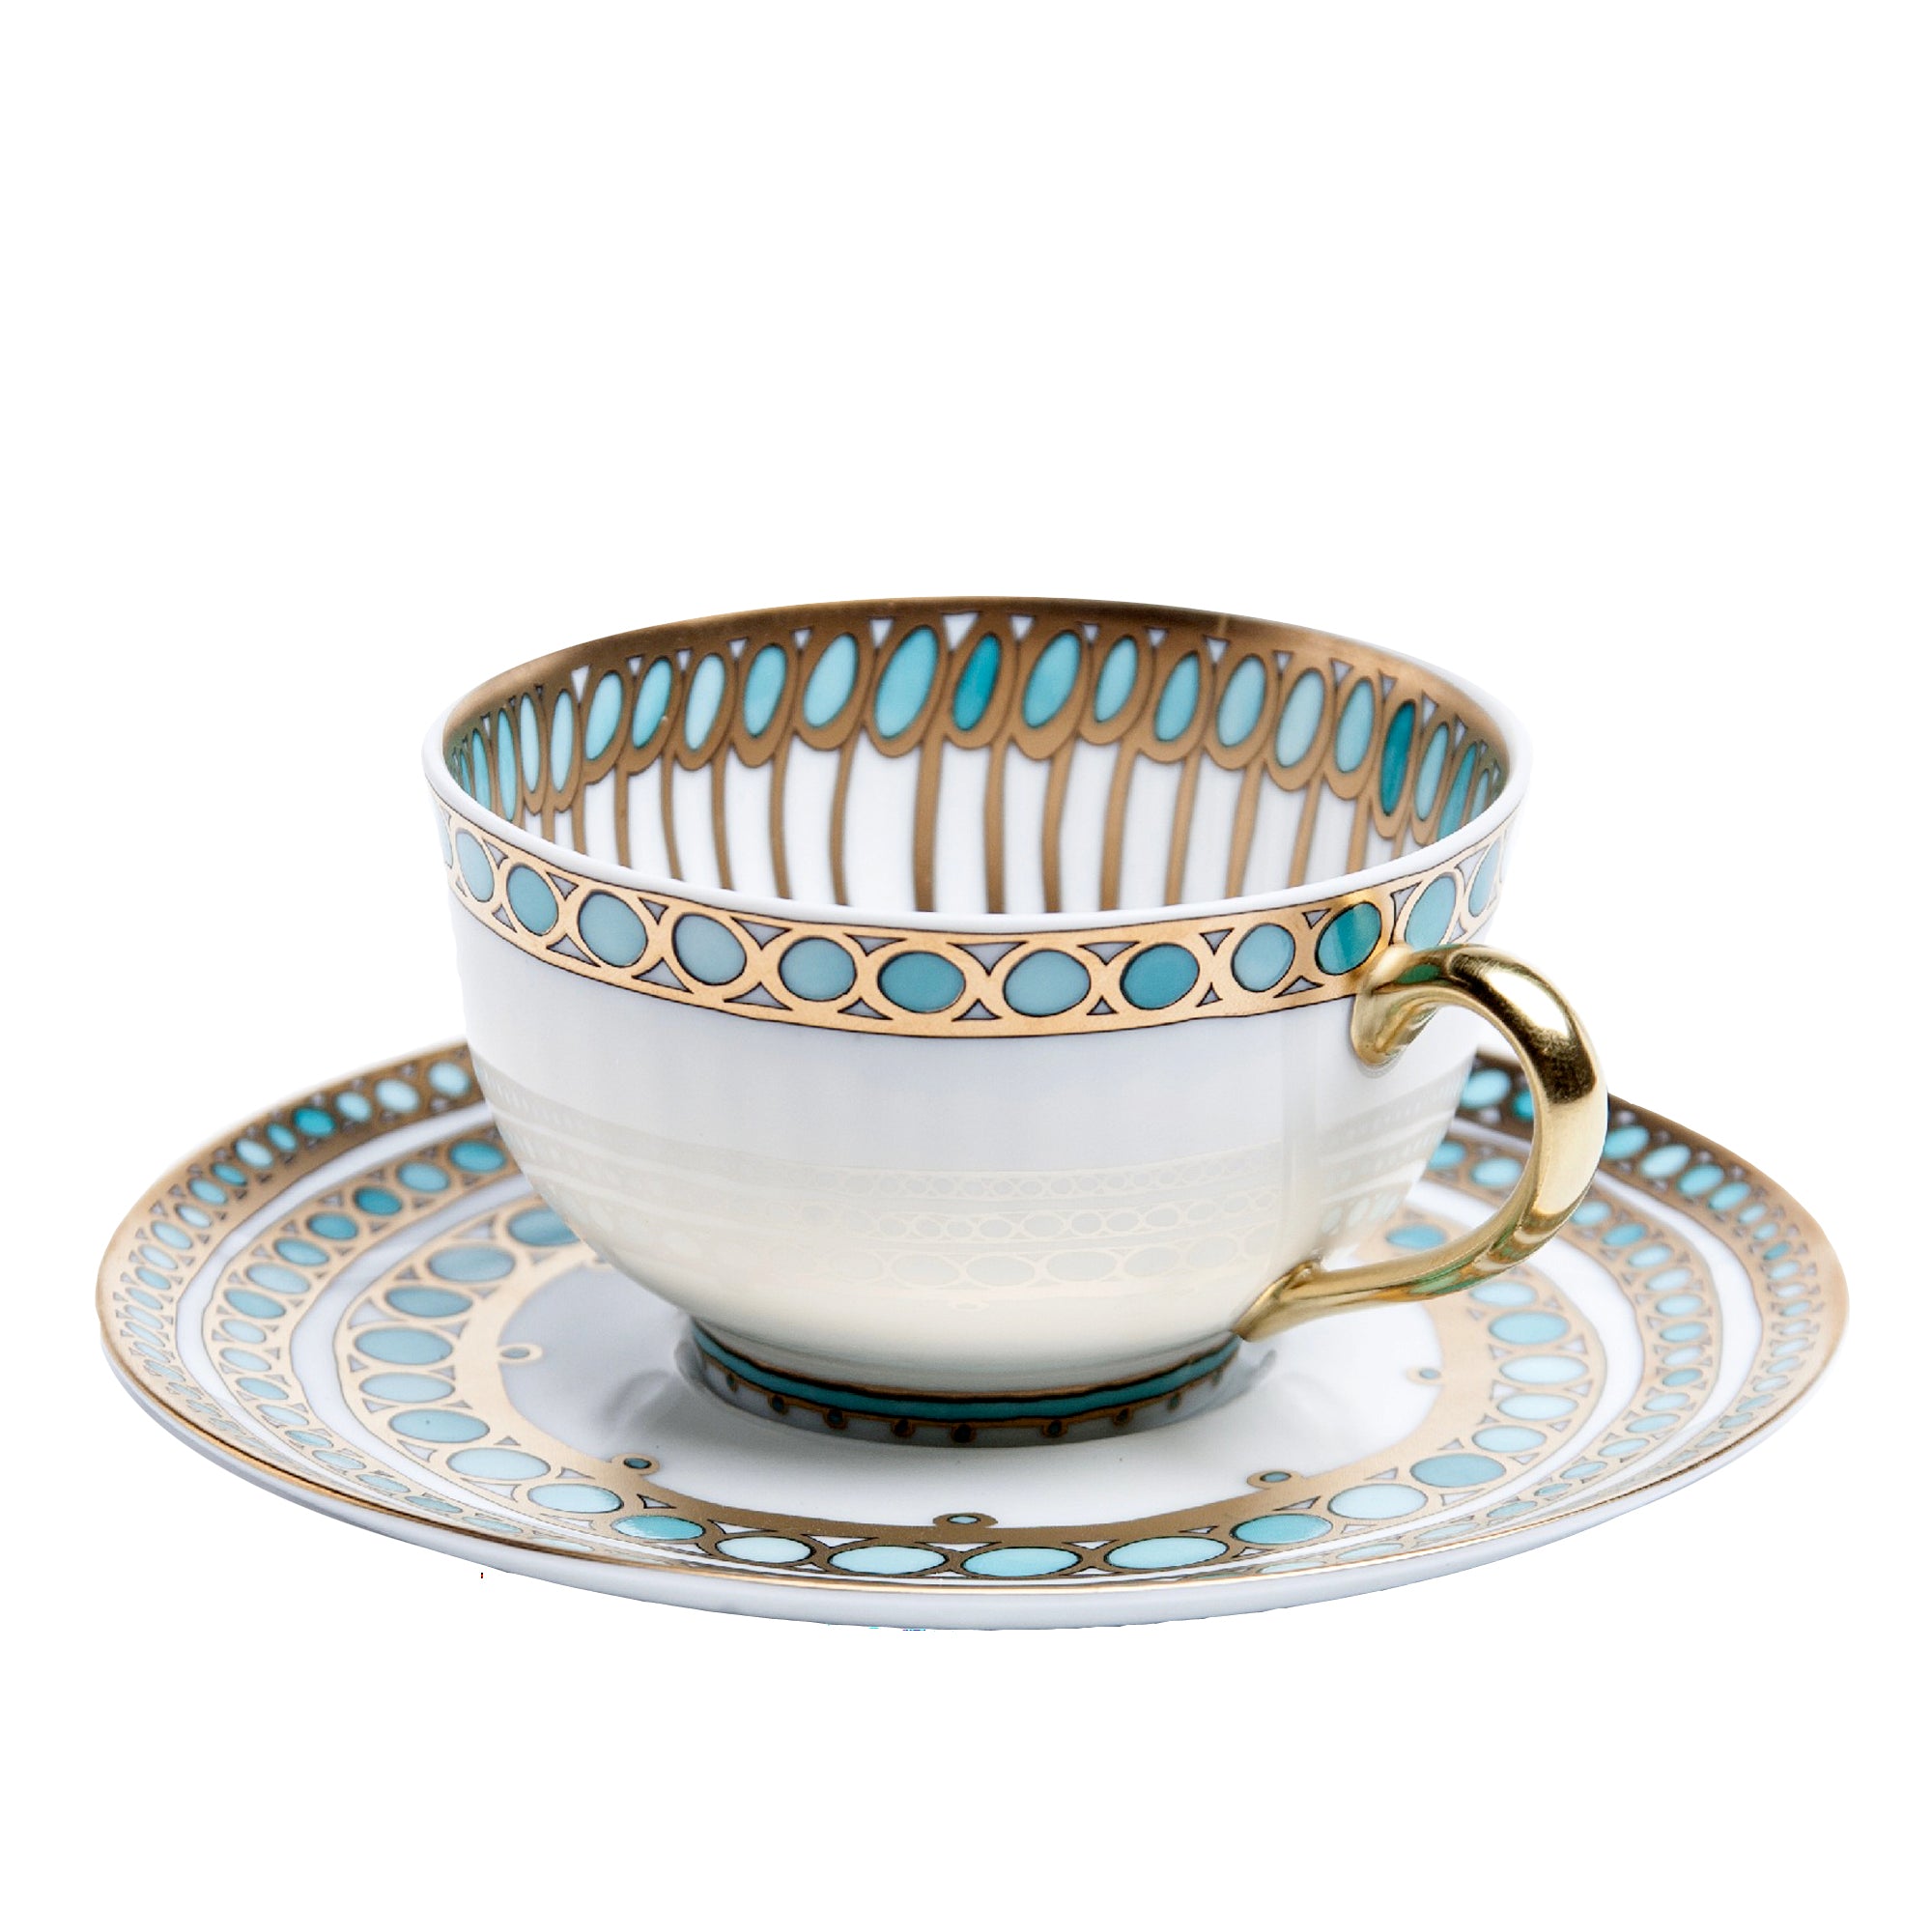 Simply Anna Antique Tea Cup and Saucer - Jung Lee NY